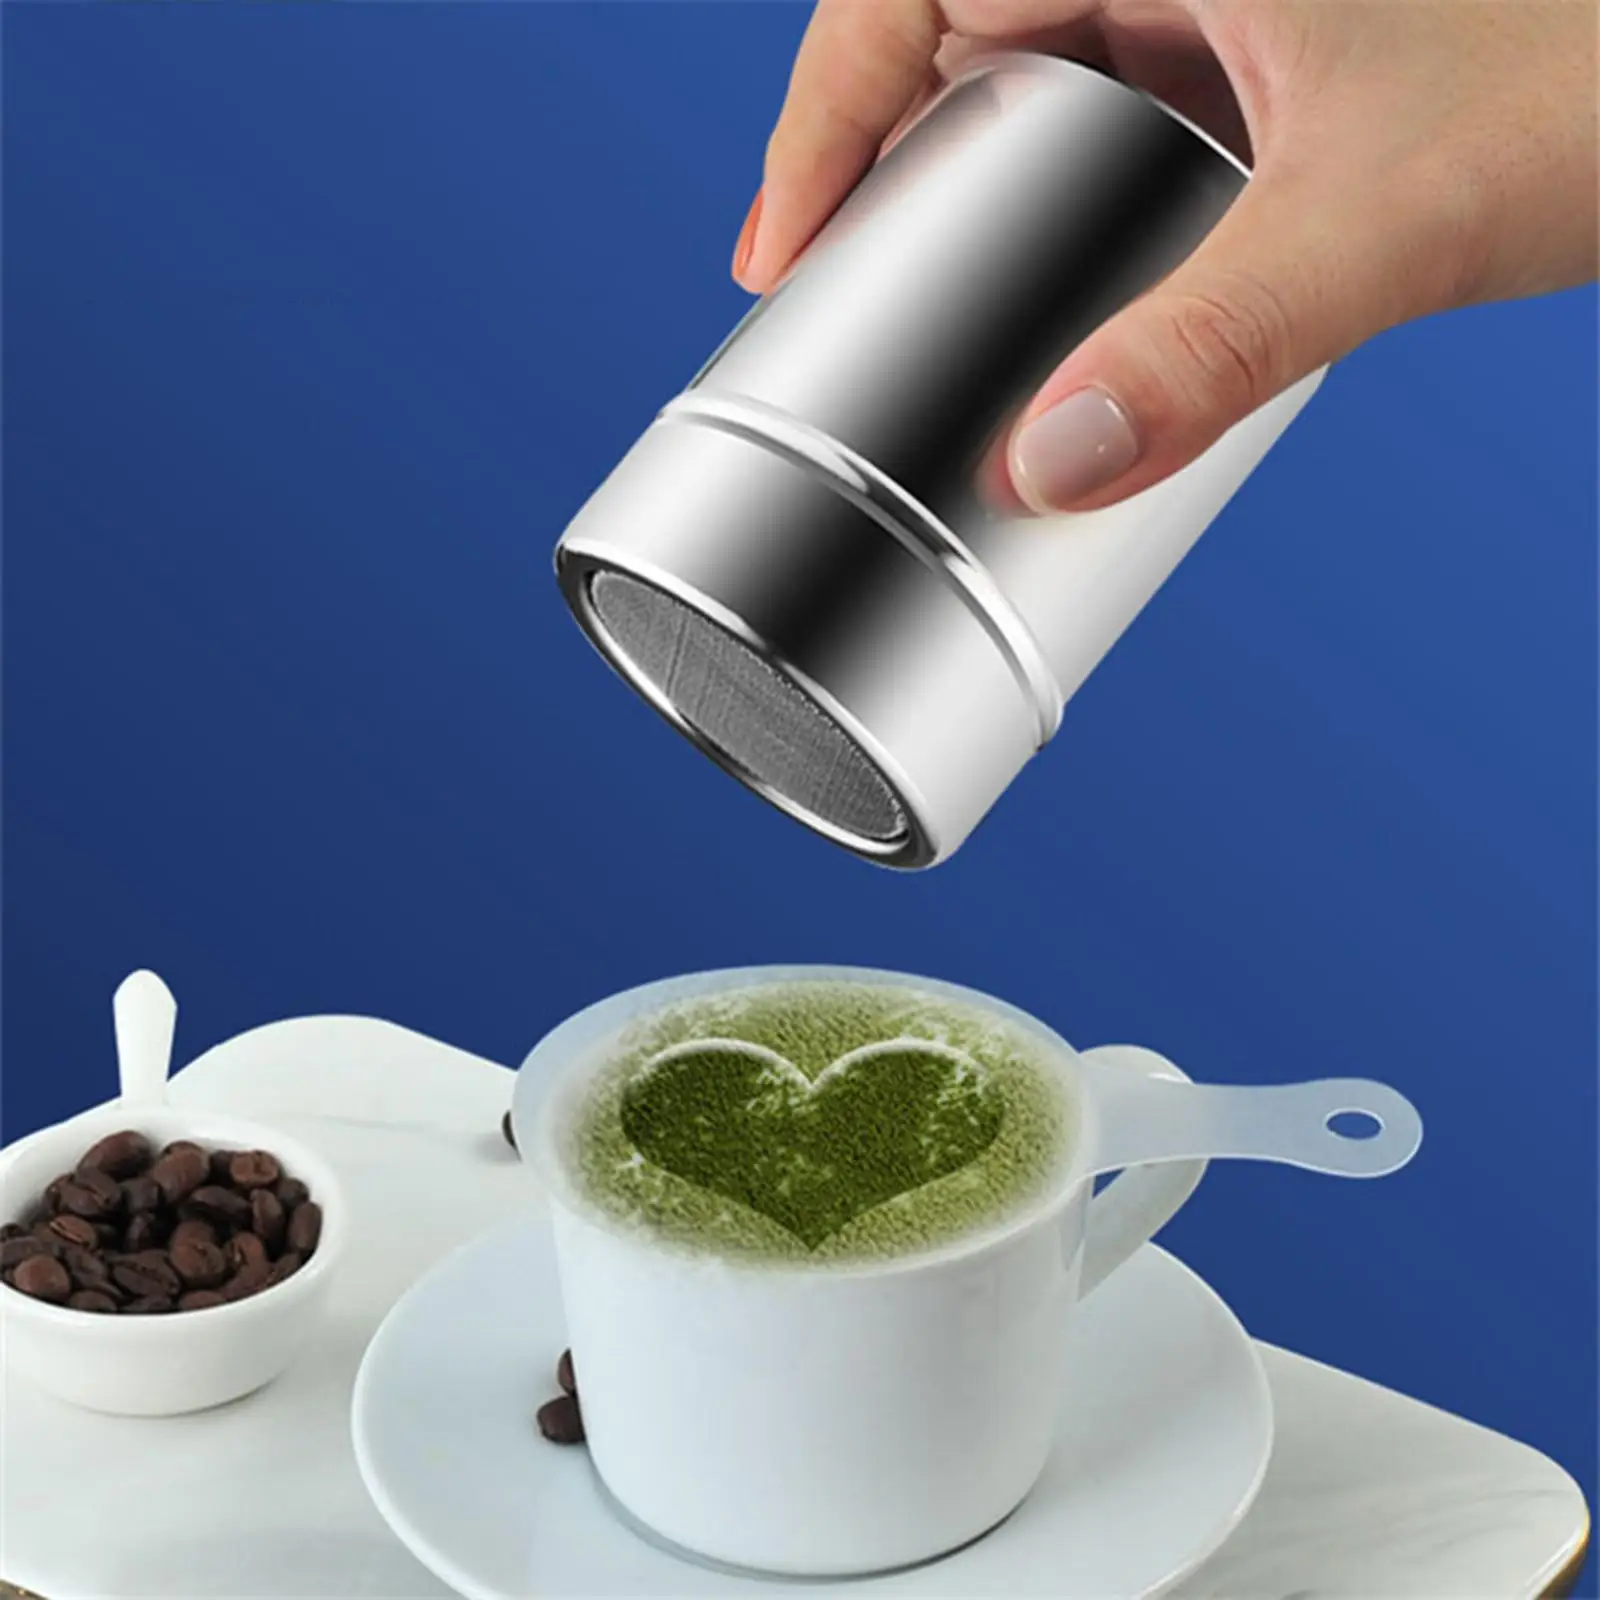 Stainless Steel Powder Sugar Shaker Fine Mesh Coffee Sifter Icing Sugar Dredger for Restaurant Drinks Coffee Art Cocoa Cupcake